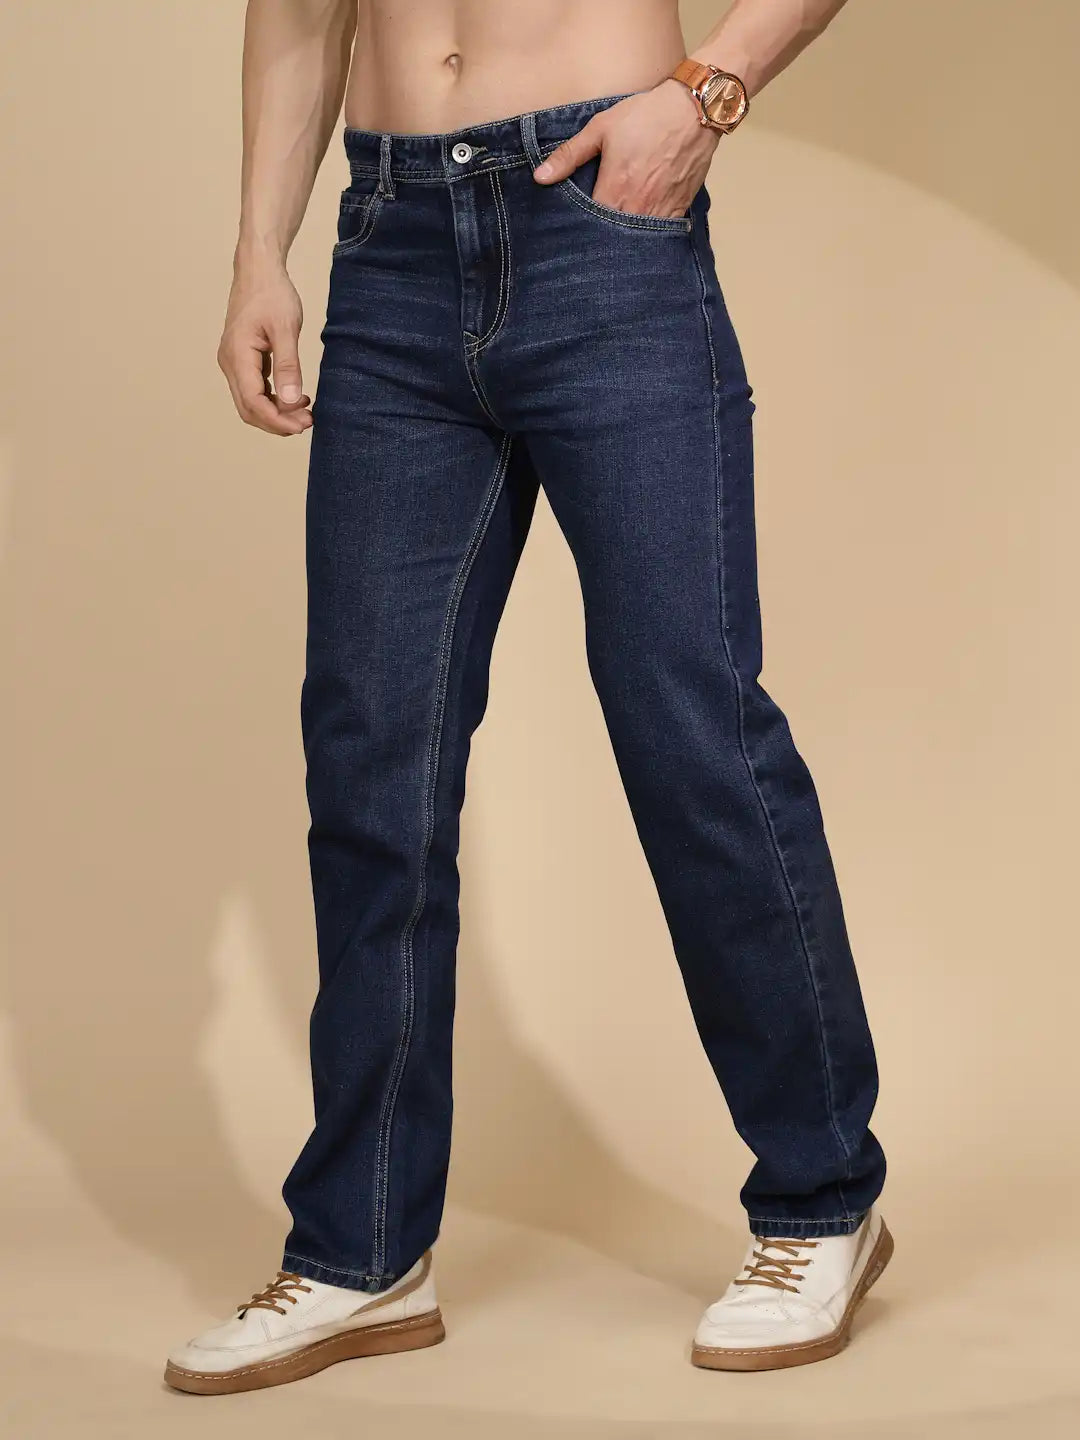 Mid Blue Cotton Loose Fit Jeans For Mens